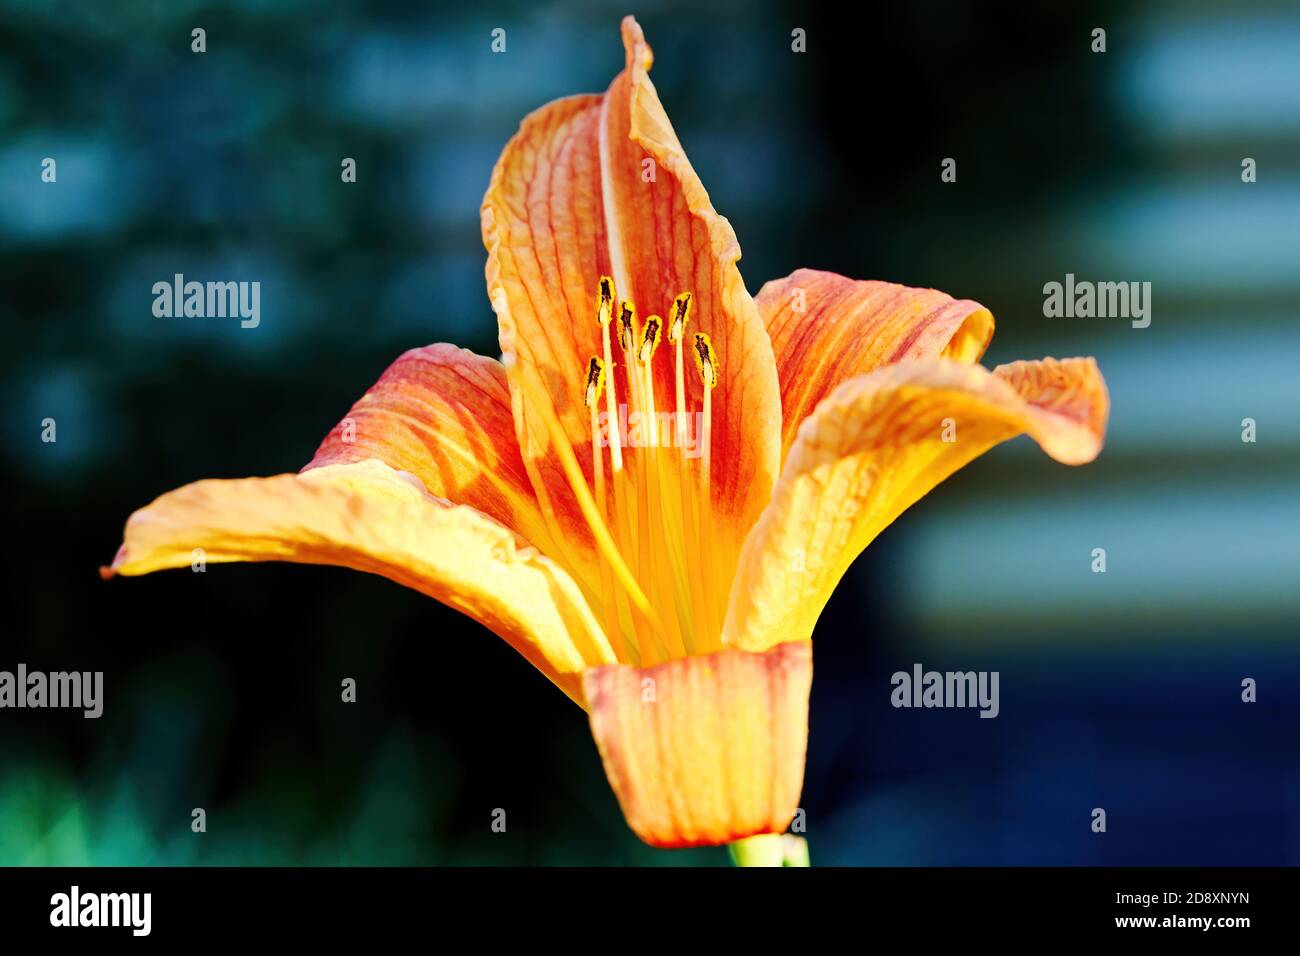 Vivid orange lily flower with stamens in the garden with a blurred background. Floral and herbal backgrounds Stock Photo